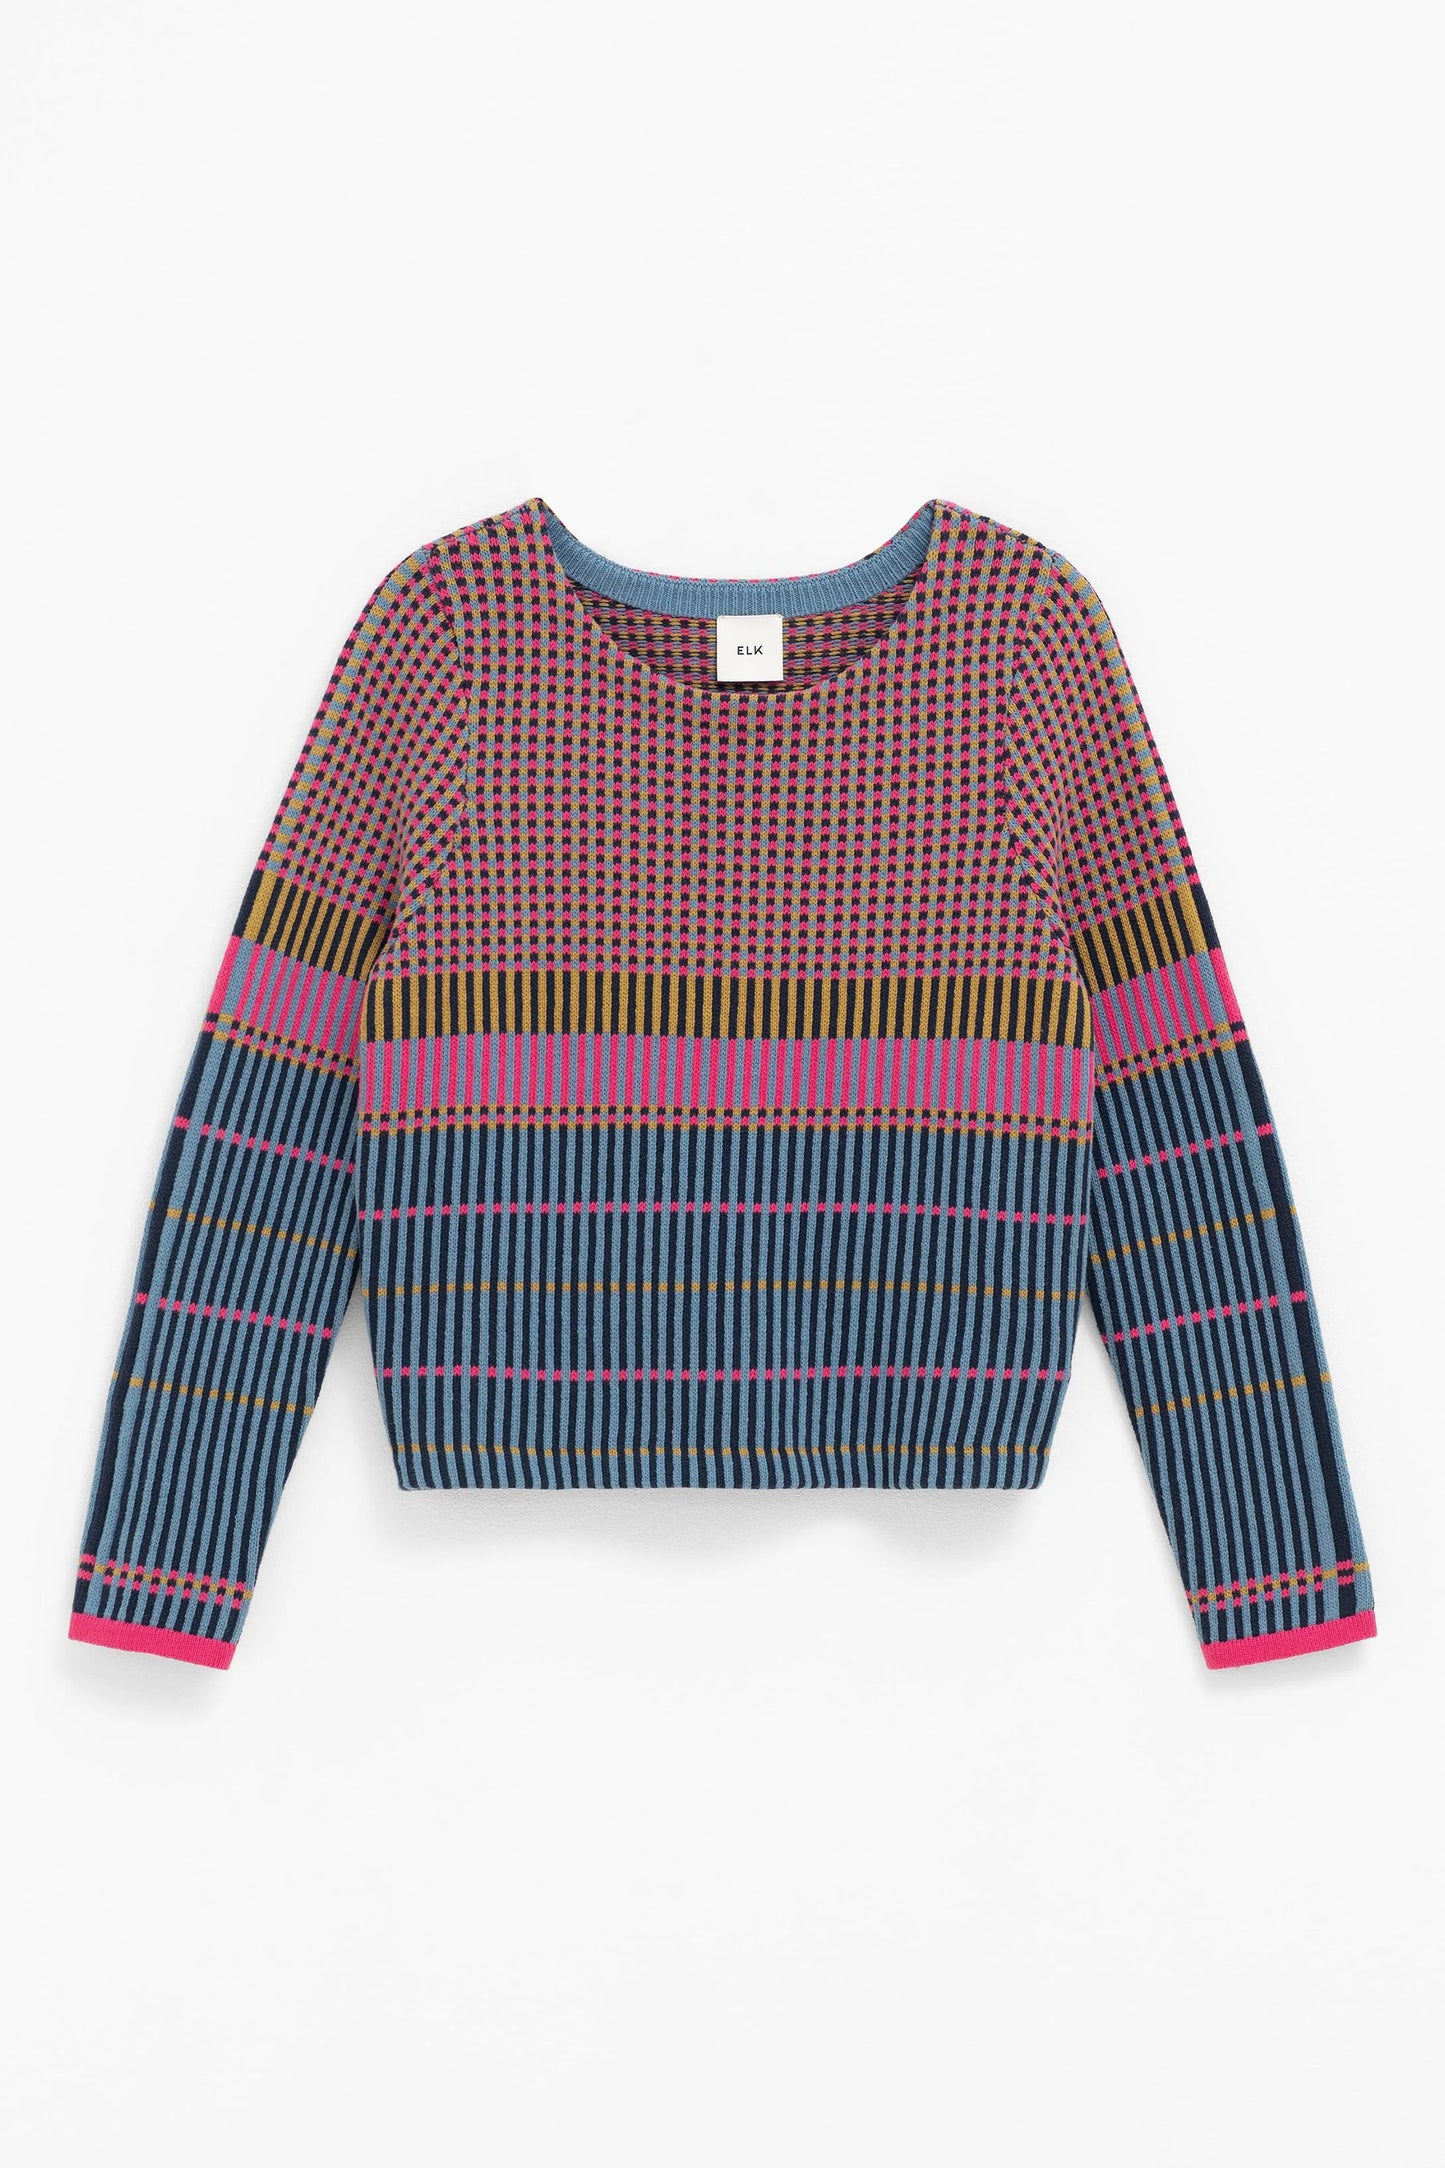 
                  
                    Cila Jumper | Pink Modern shape, multi-coloured.  In a multi-coloured check knit design, the Cila Knit Jumper is a boat neck boxy-cut jumper with set-in sleeves. It has a cropped body length, with small side splits at the hem for added comfort.
                  
                